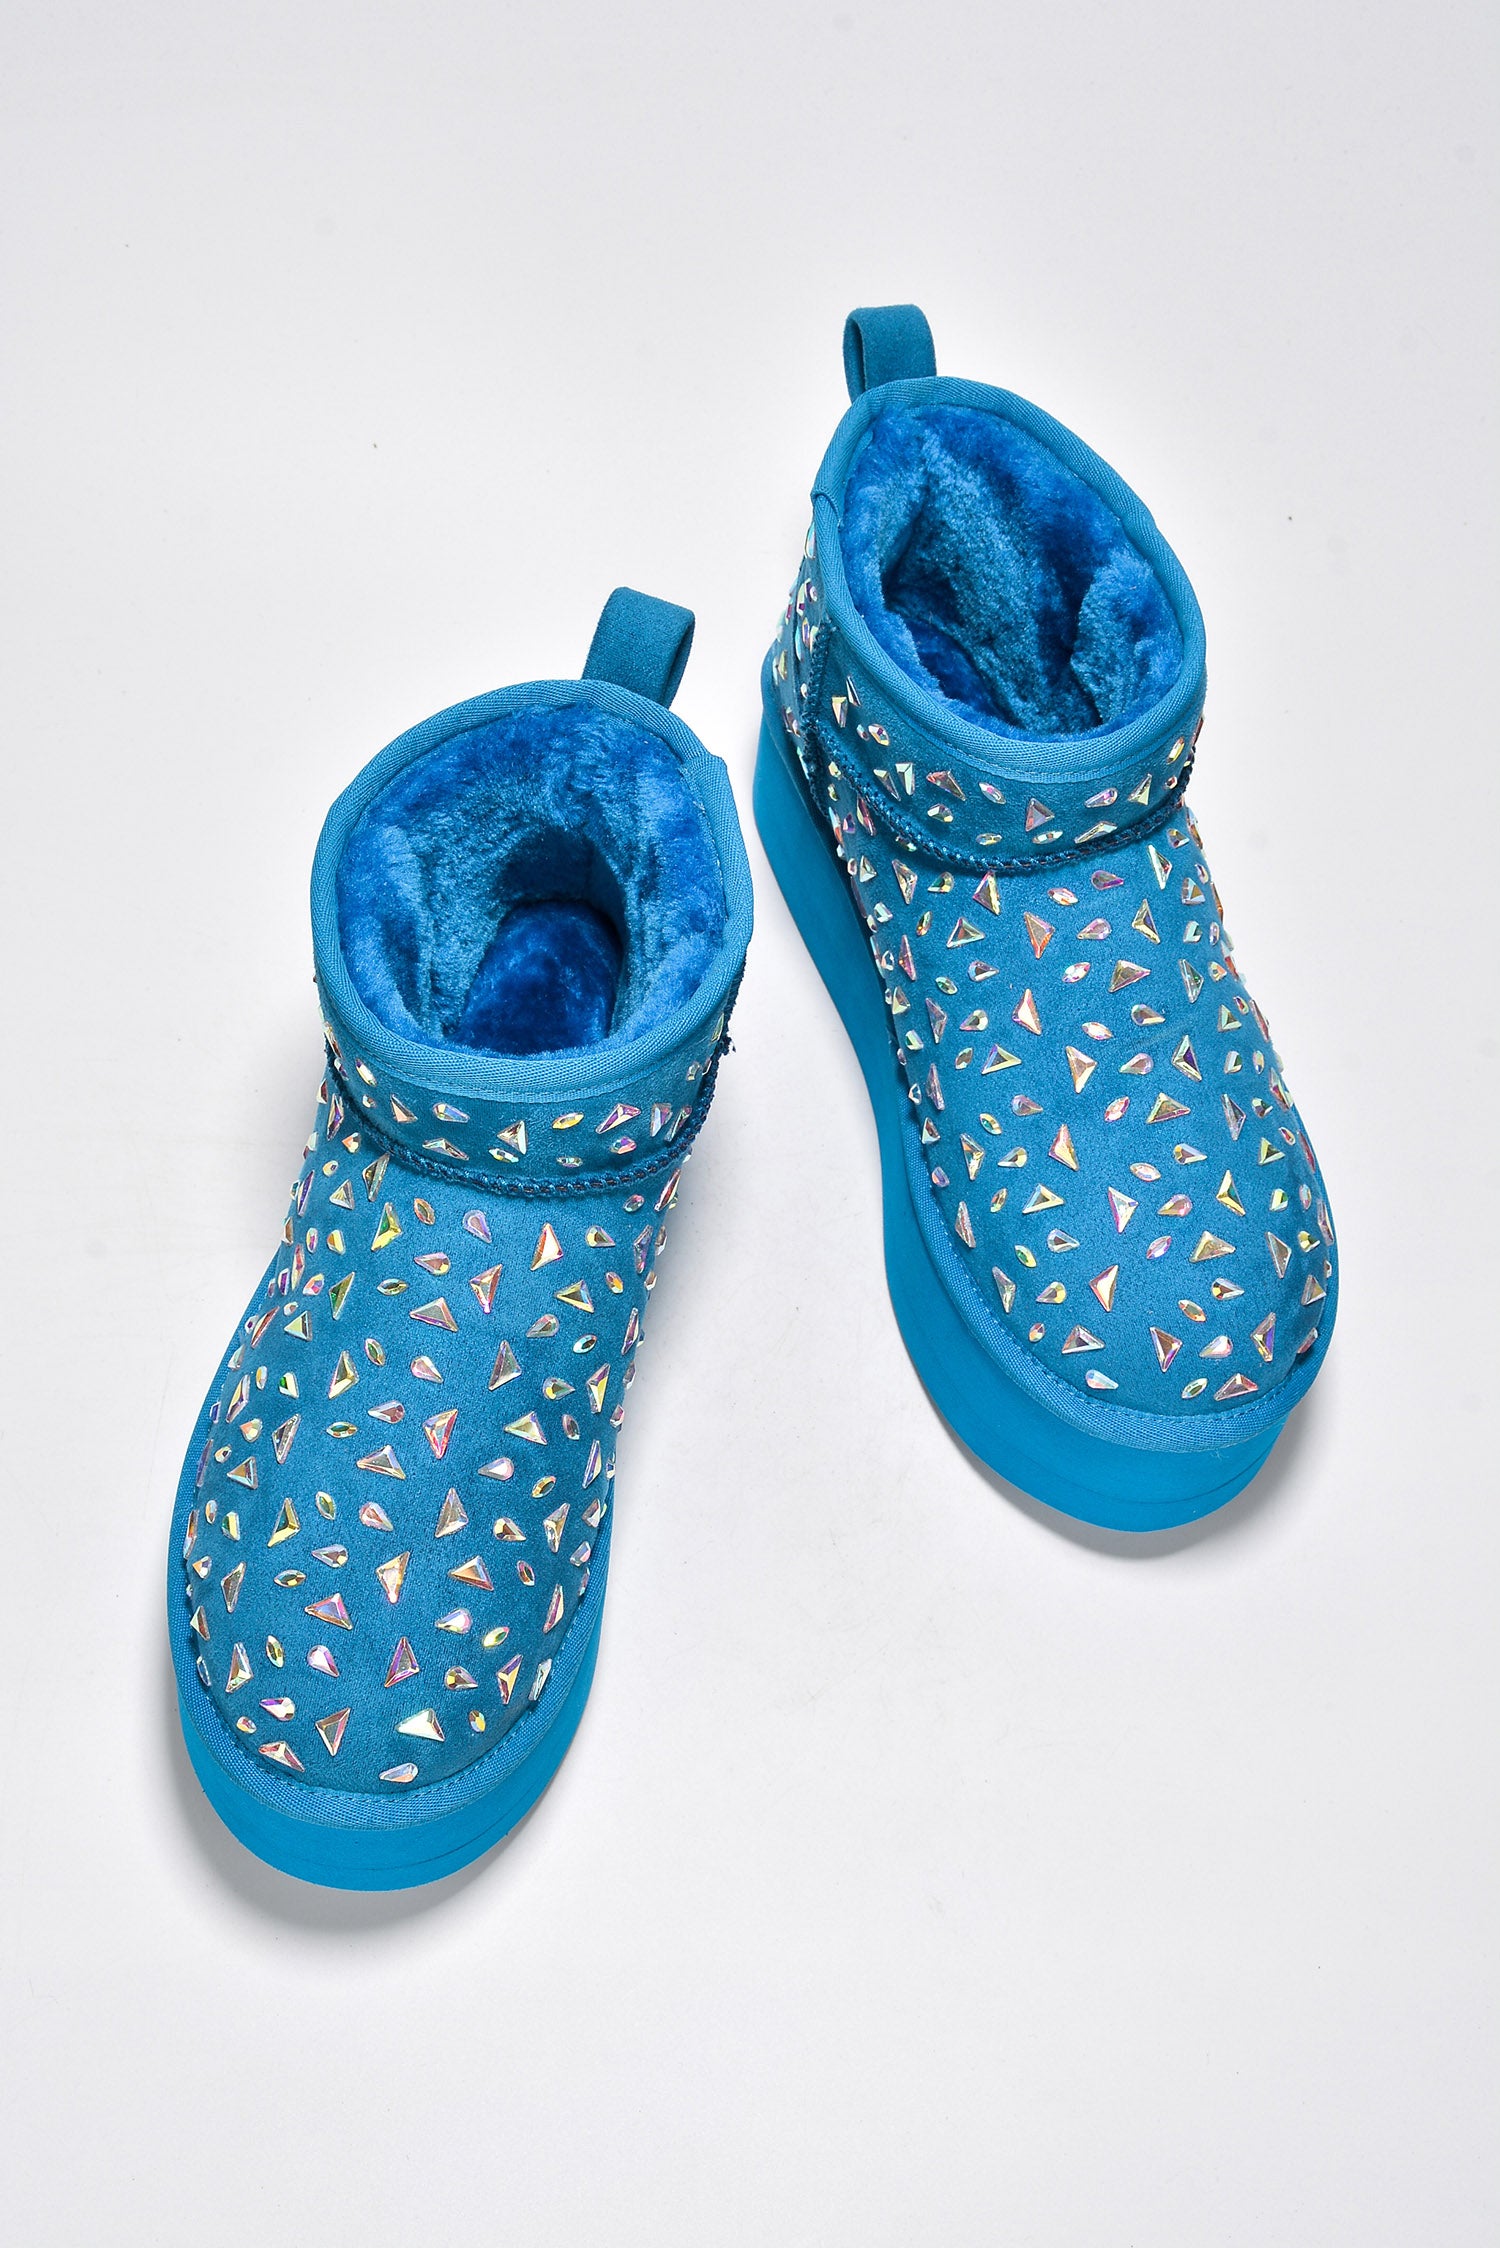 Cape Robbin - INTERBLE - BLUE - BOOTIES